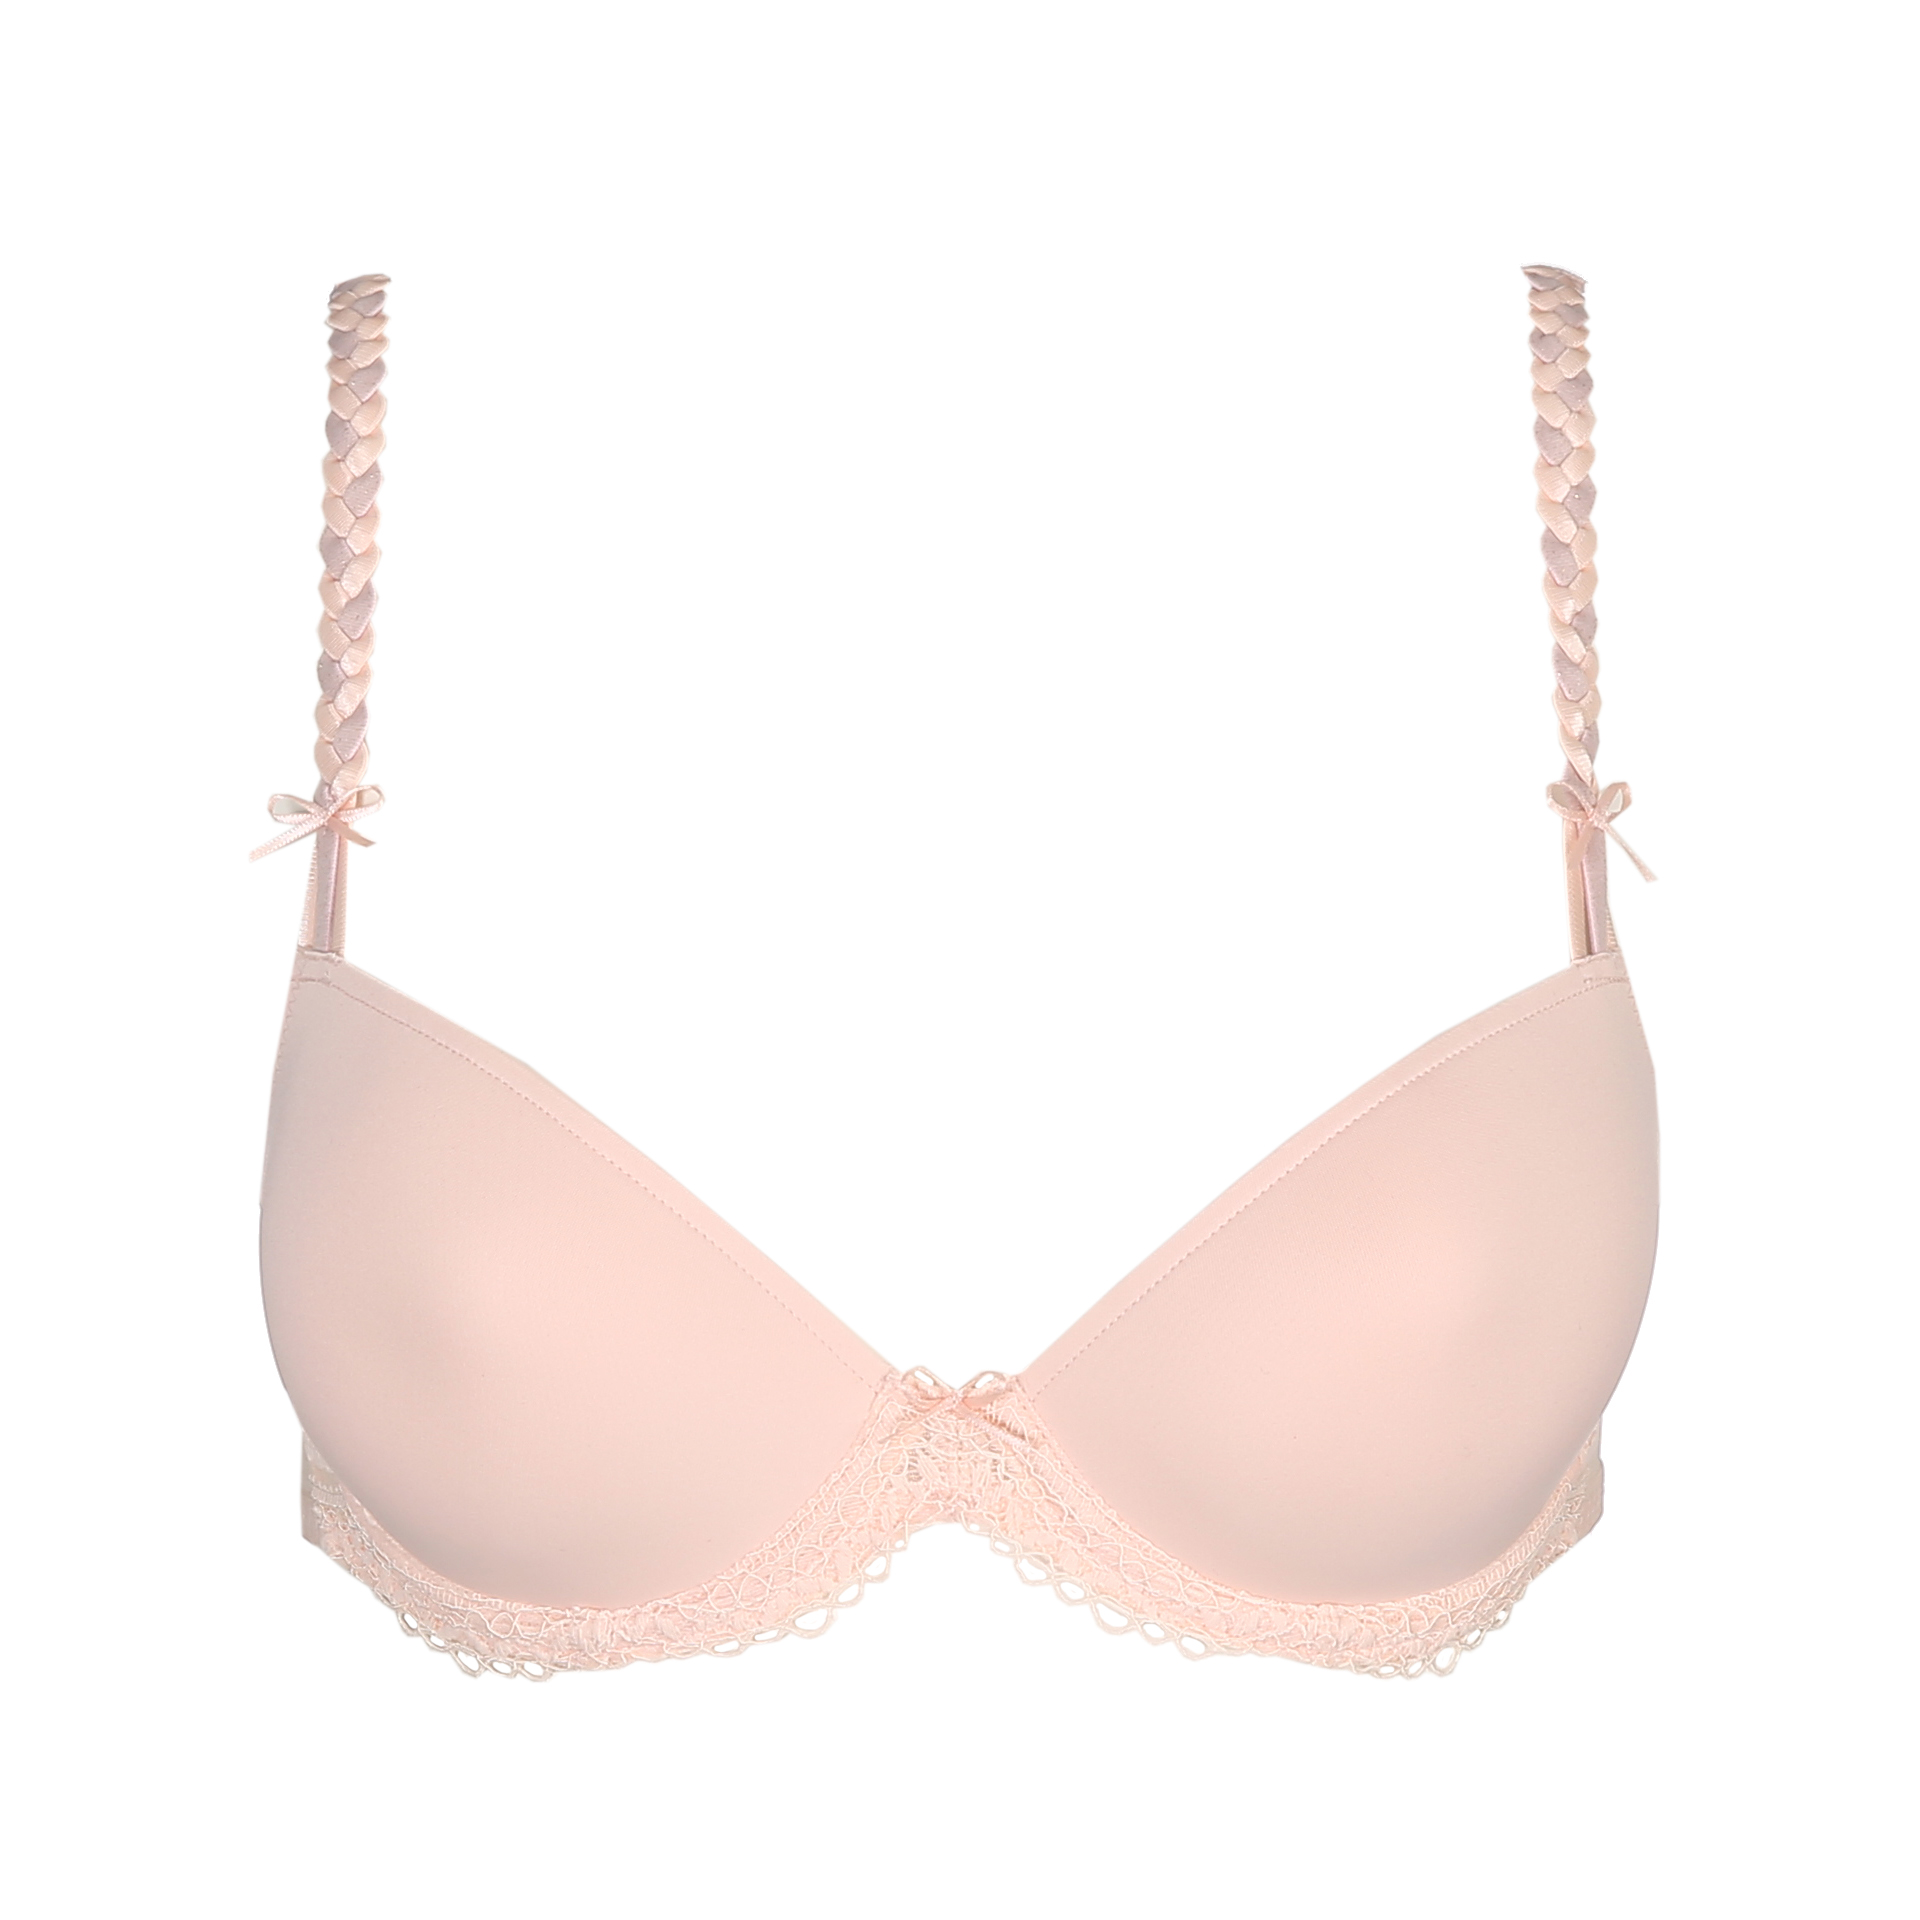 Marie Jo DOLORES glossy pink padded bra - round shape | Marie Jo United ...